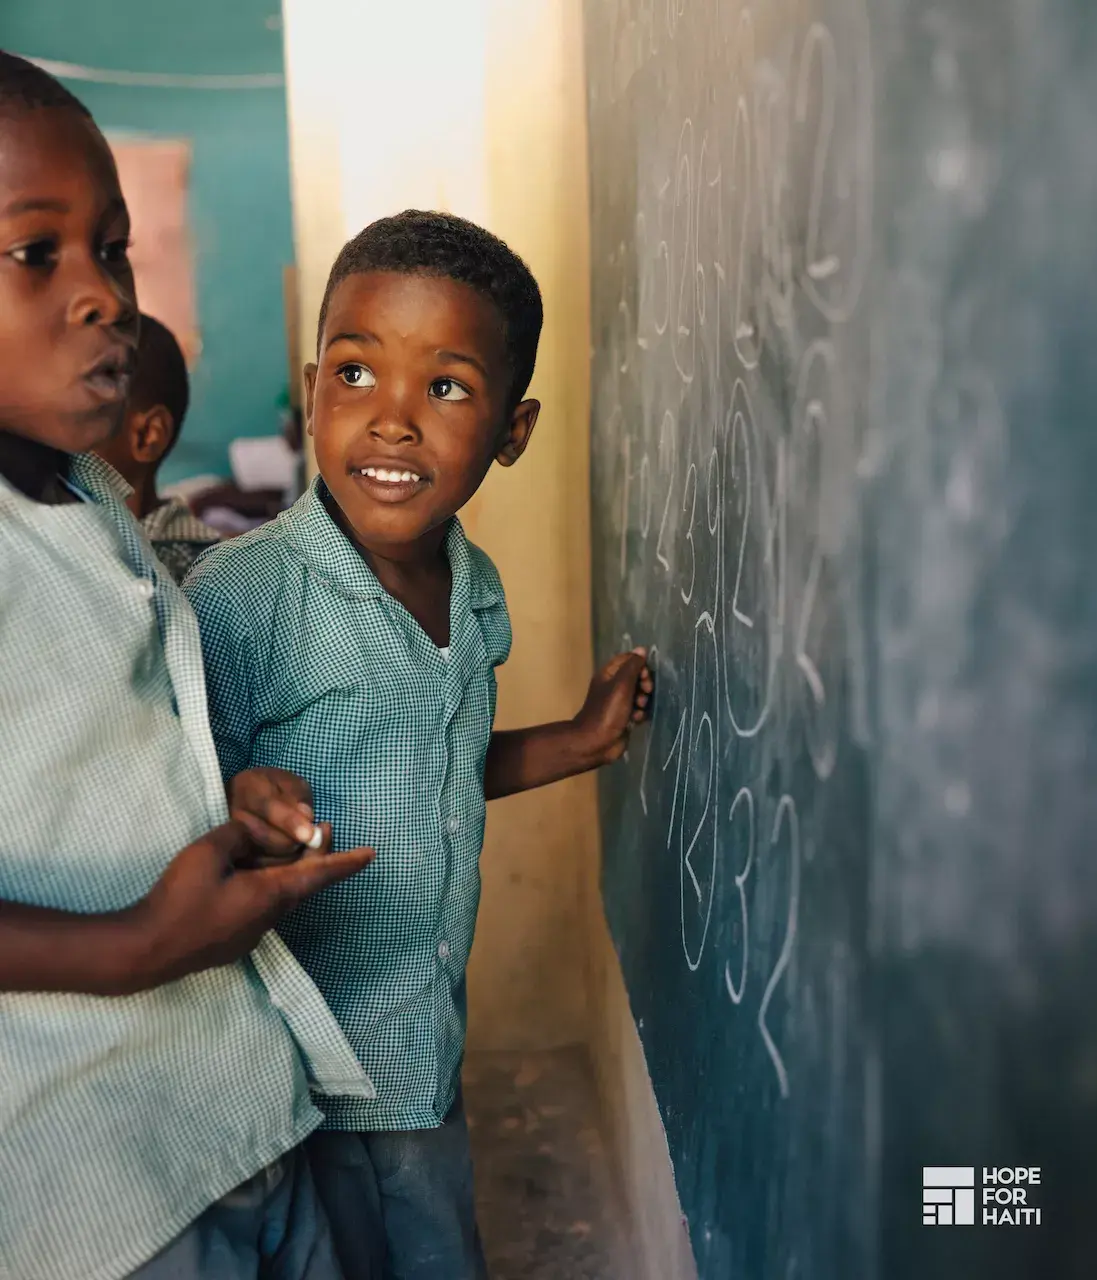 Hope for Haiti education picture